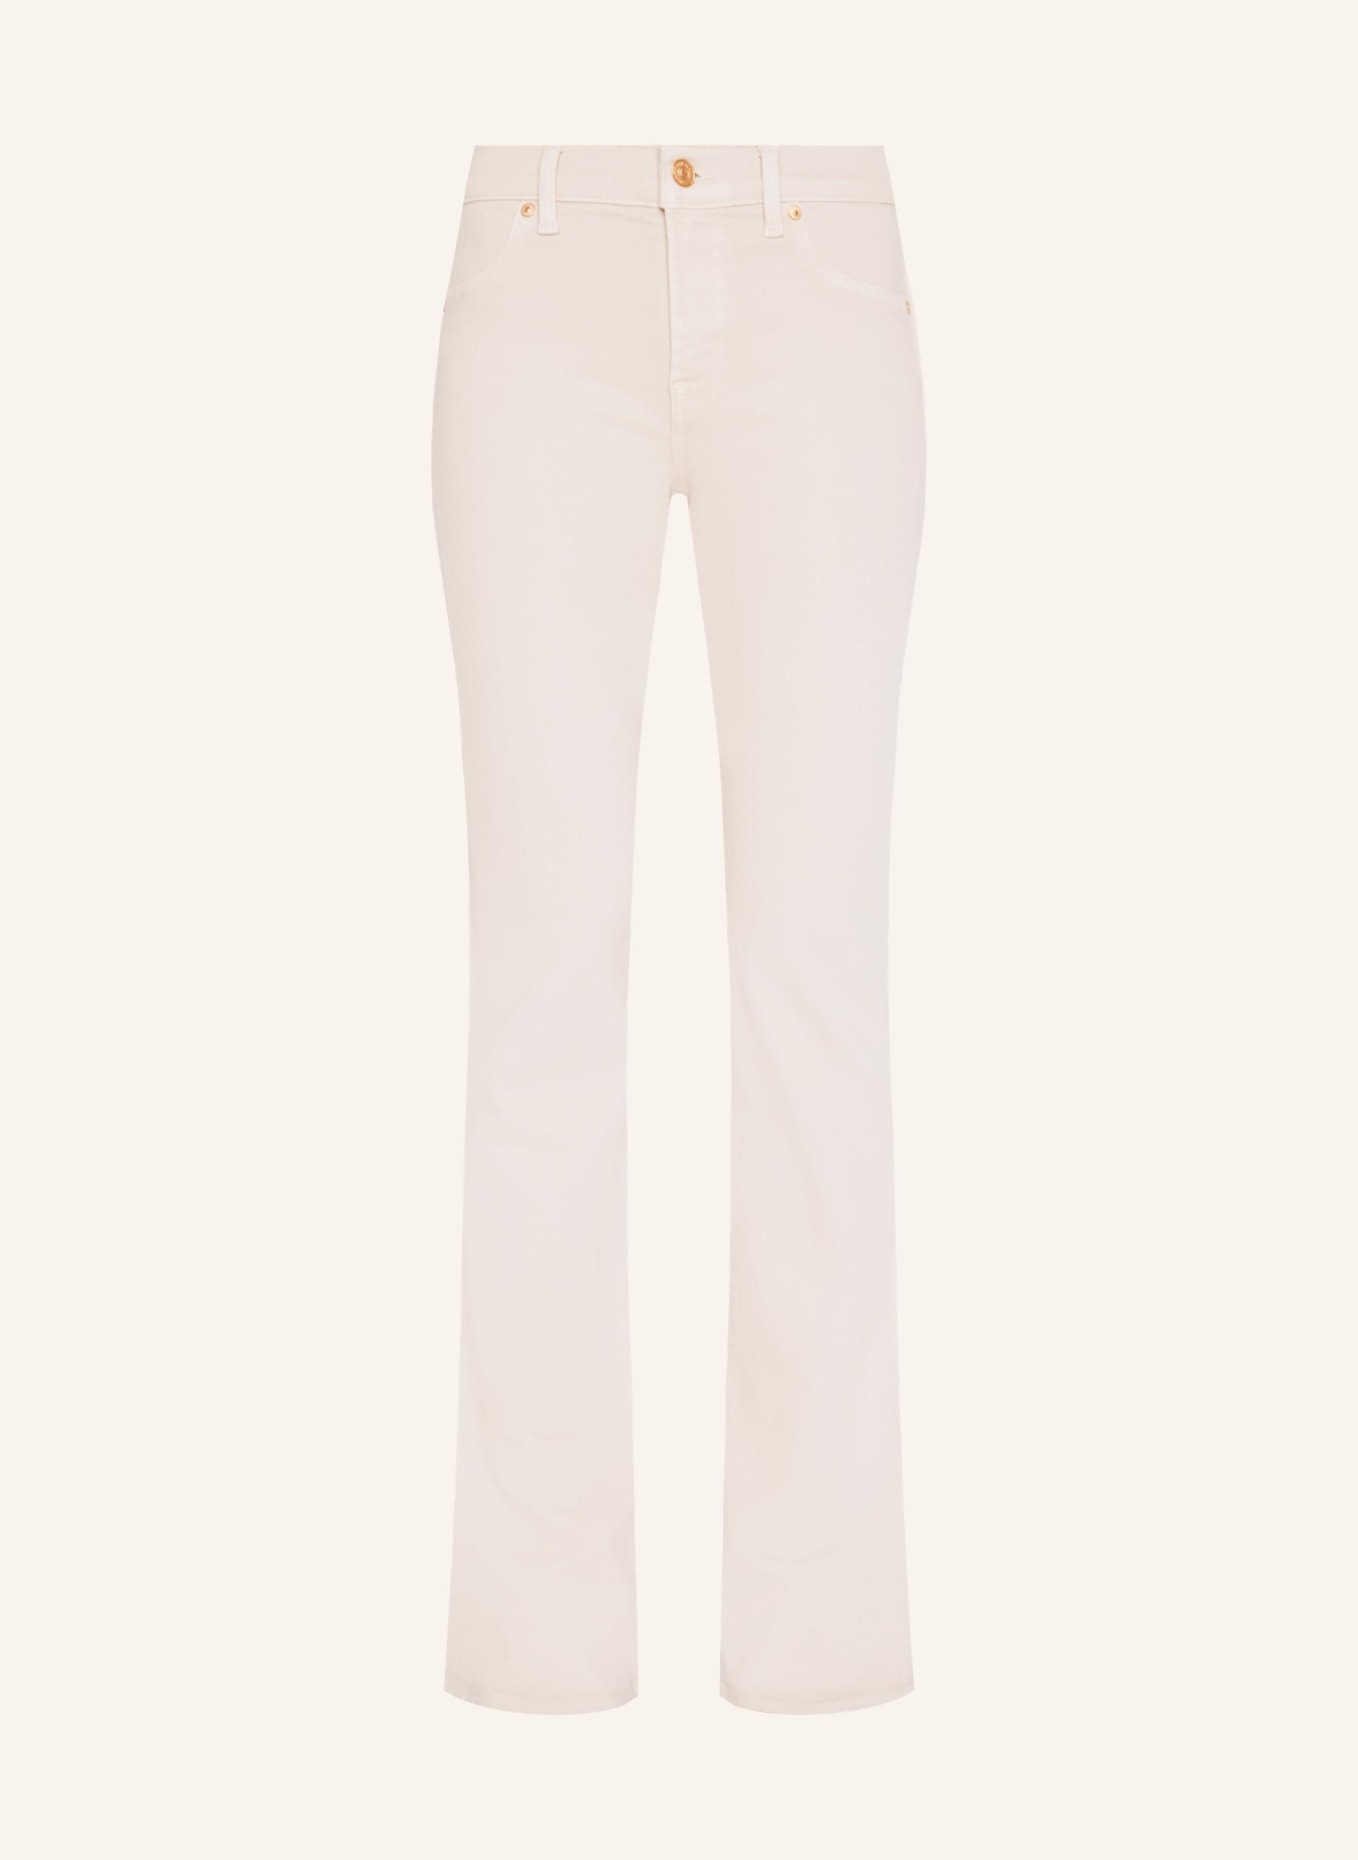 7 for all mankind Pants BOOTCUT Bootcut fit, Farbe: WEISS (Bild 1)